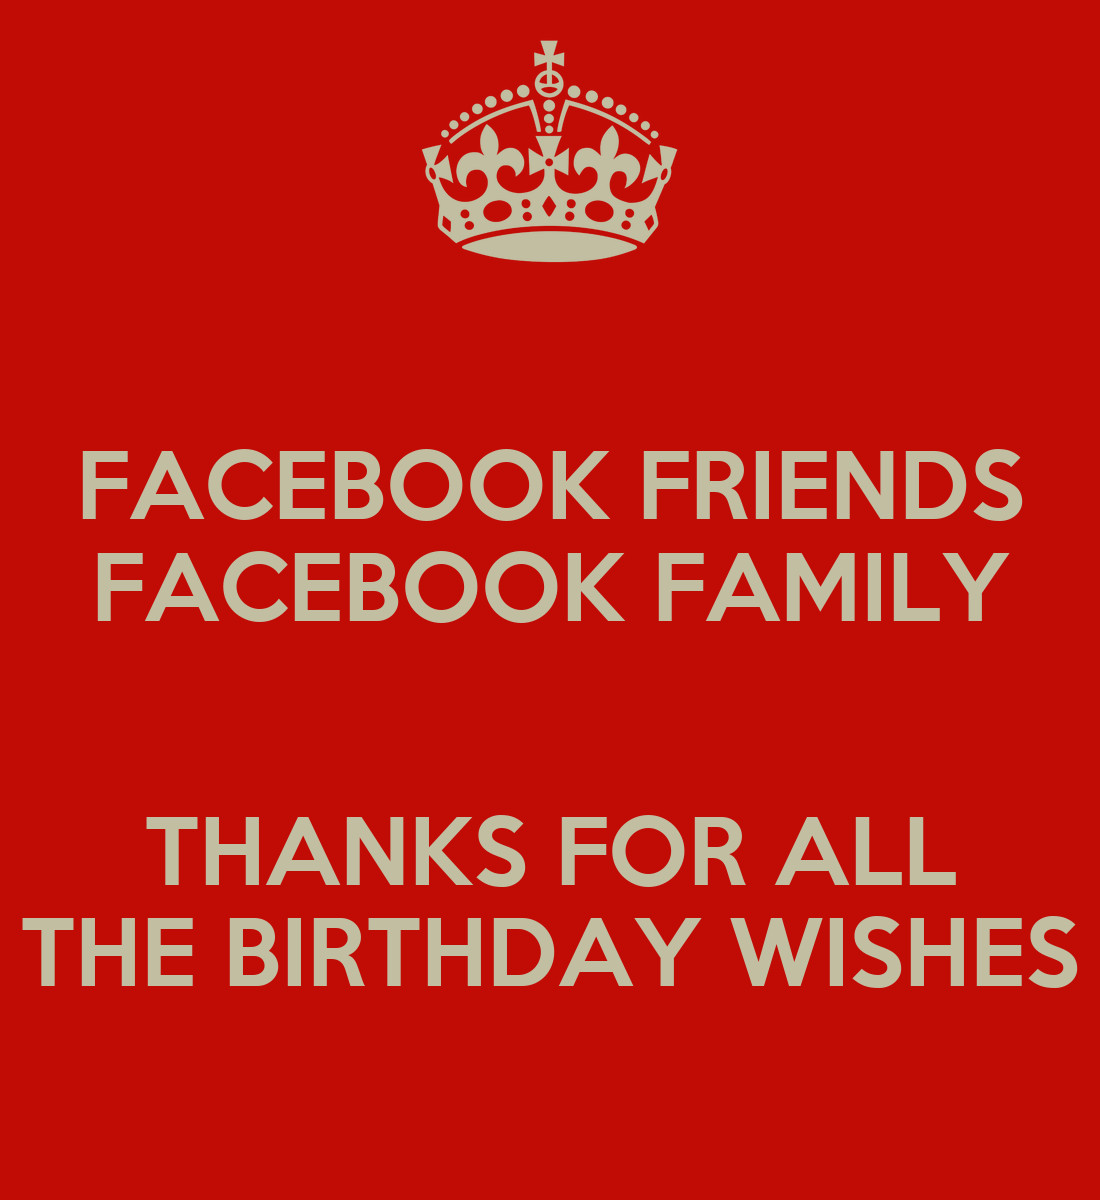 Thanks For The Birthday Wishes Facebook
 FACEBOOK FRIENDS FACEBOOK FAMILY THANKS FOR ALL THE